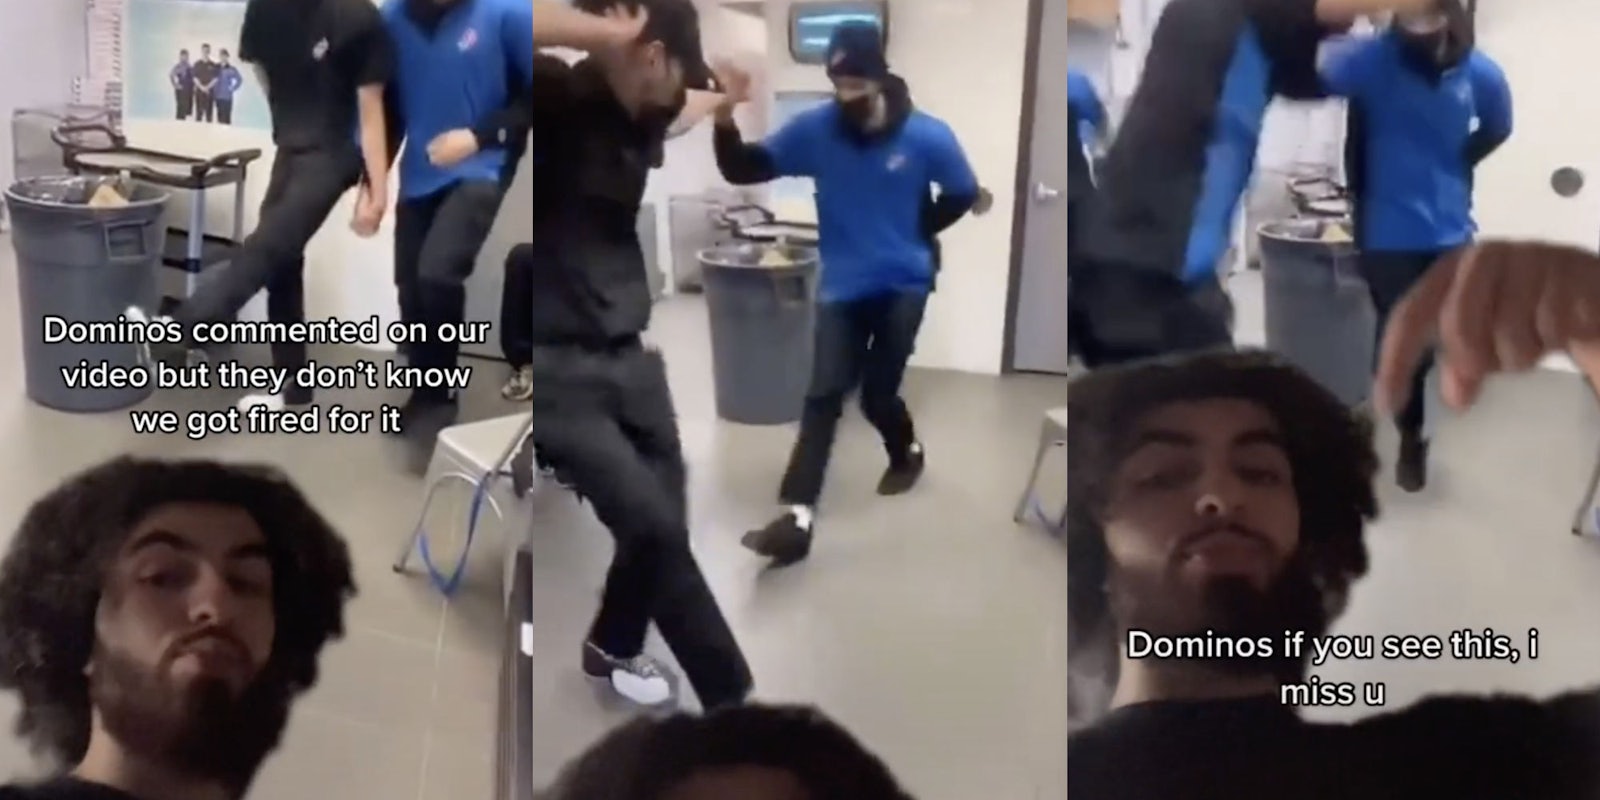 three photos of two dominos employees dancing